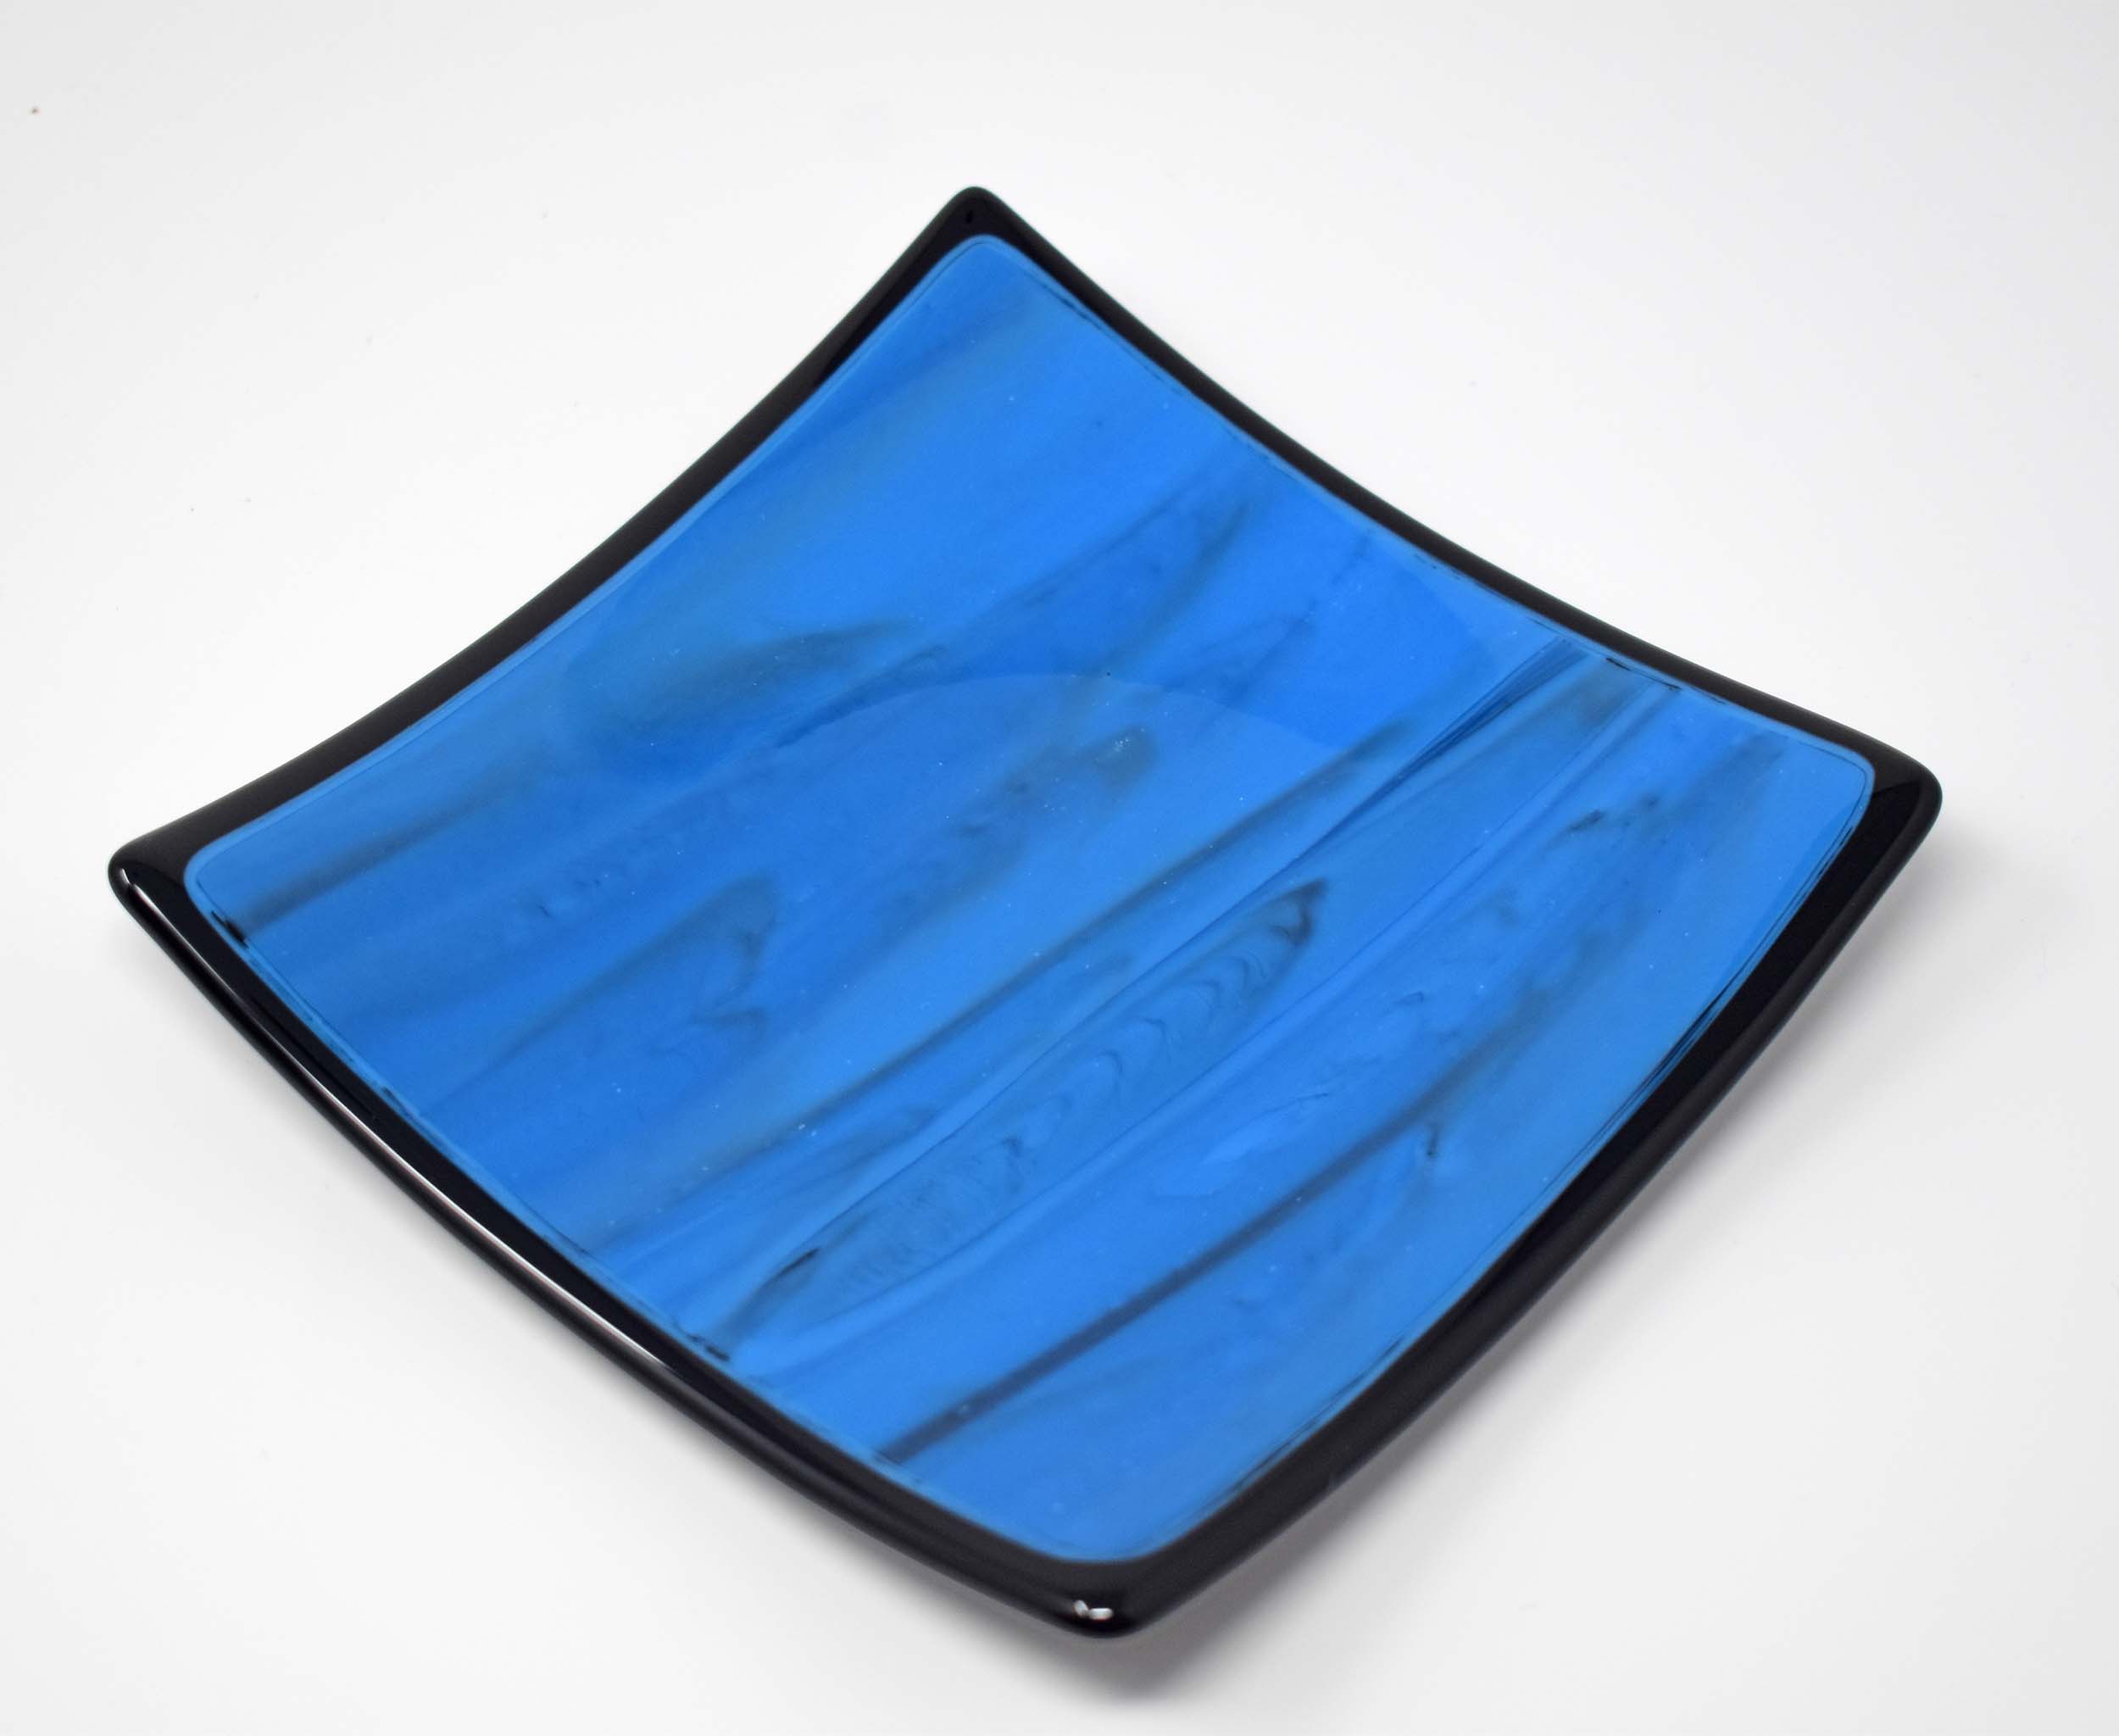 Square blue glass dish with black trim and black designs in the glass, on white background.